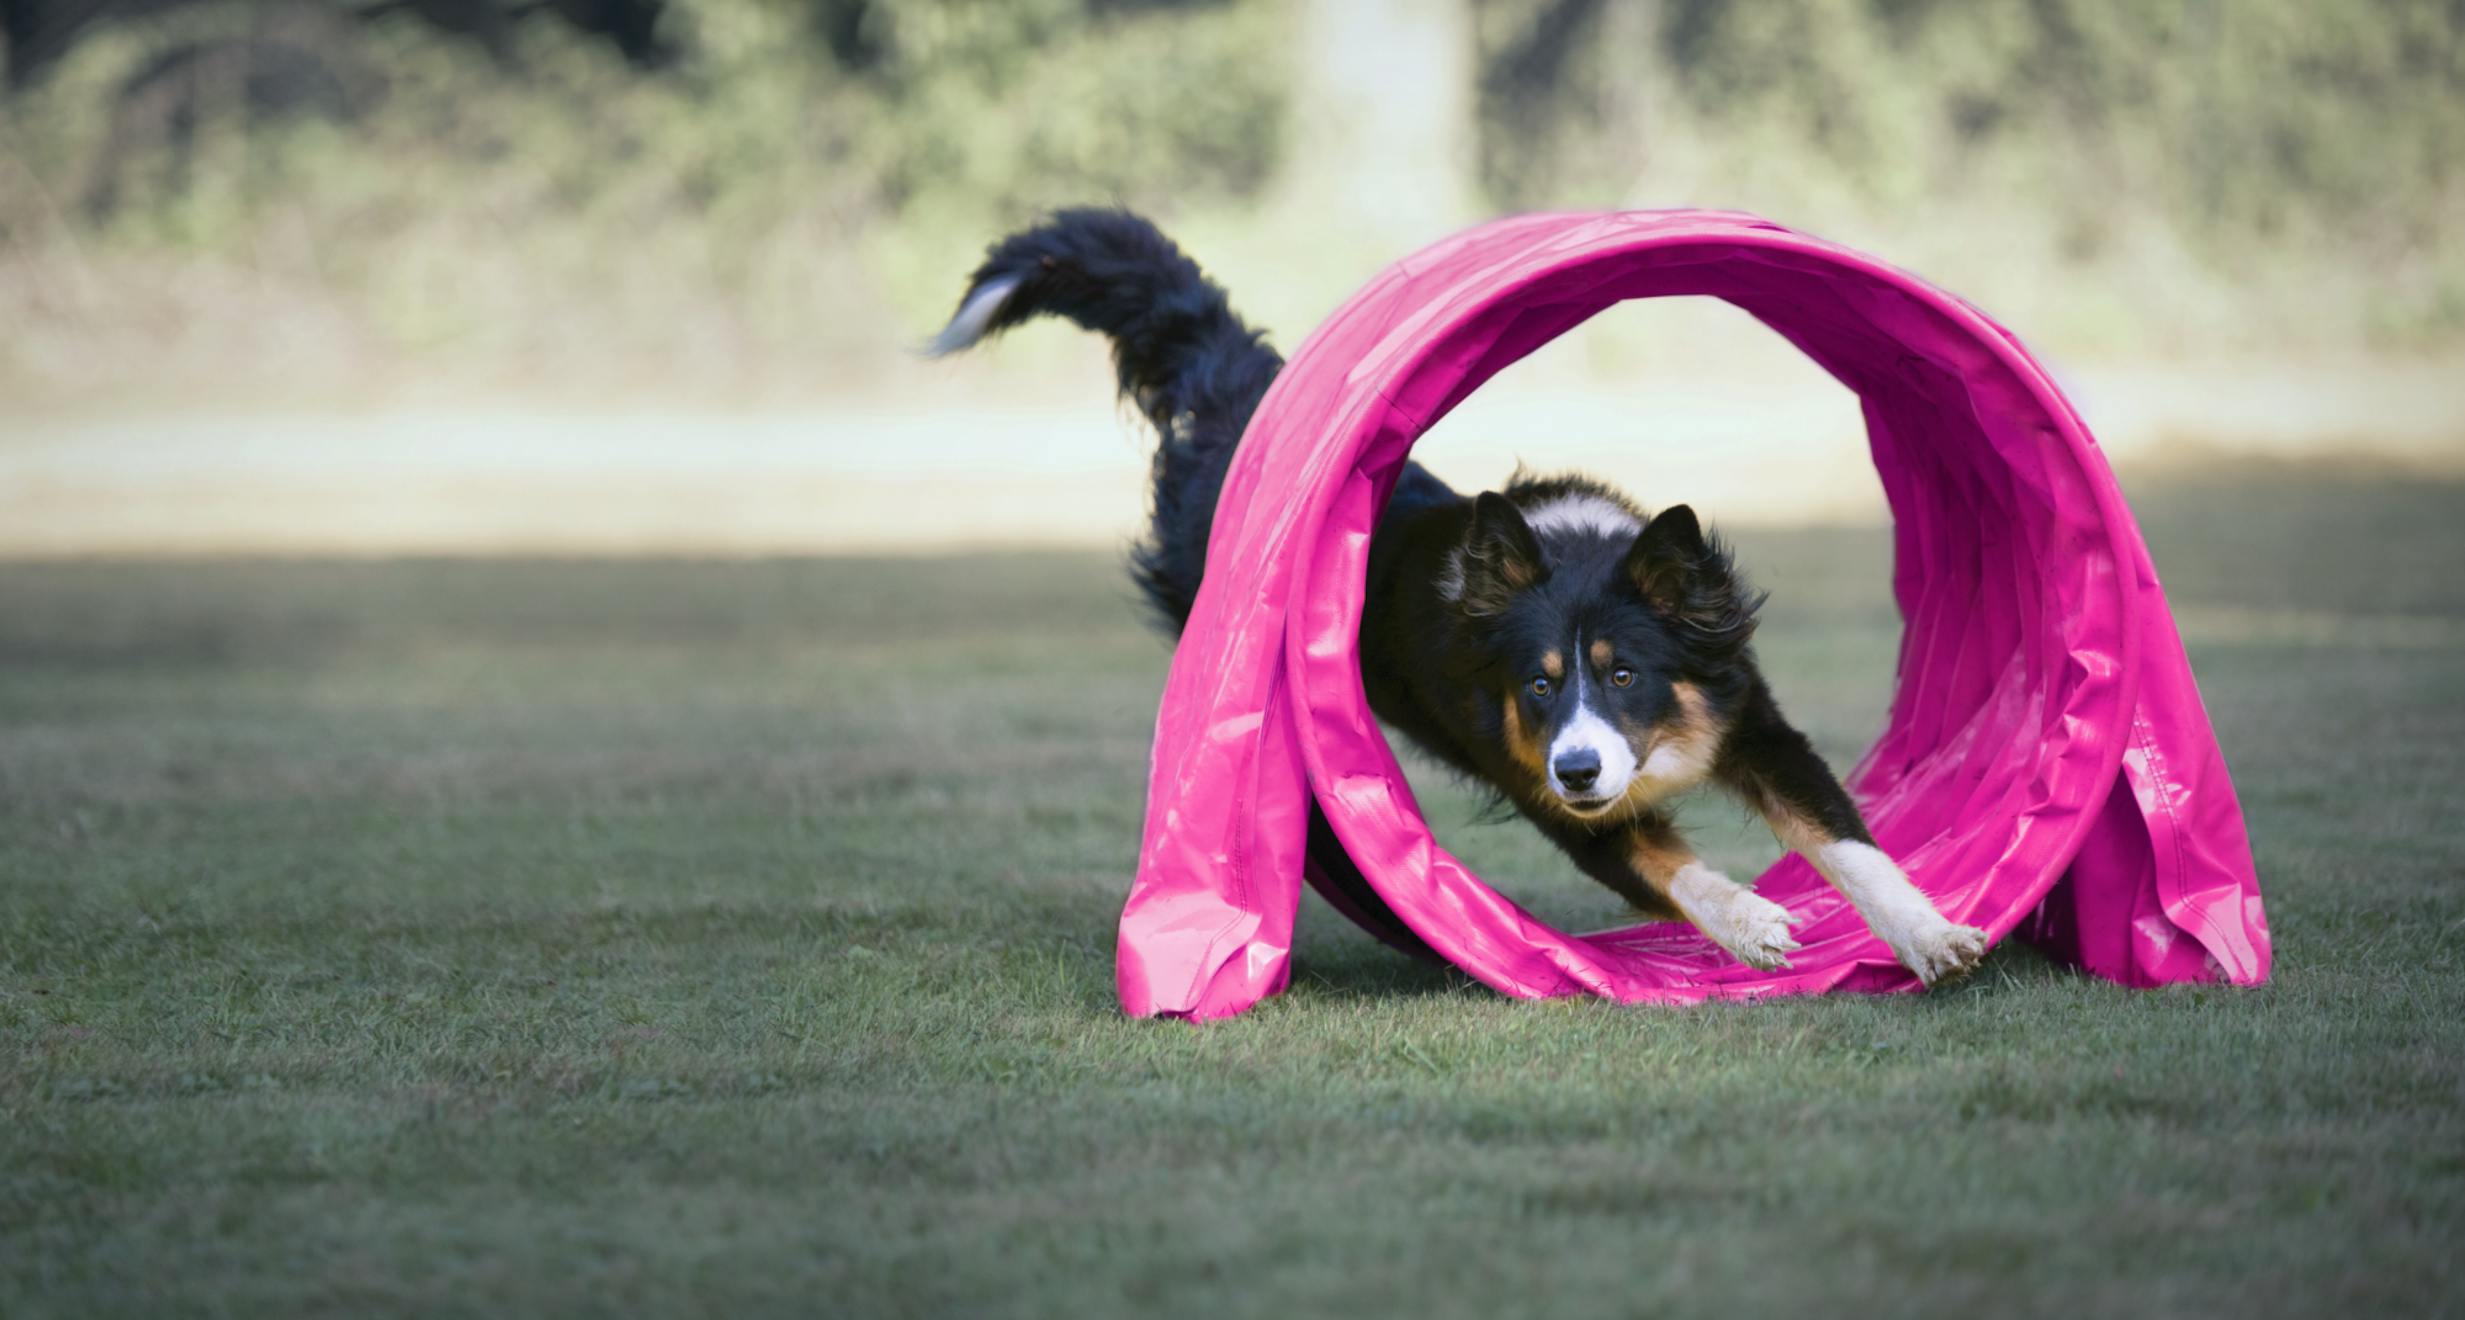 Black Sheepdog  coming out of a pink agility tunnel